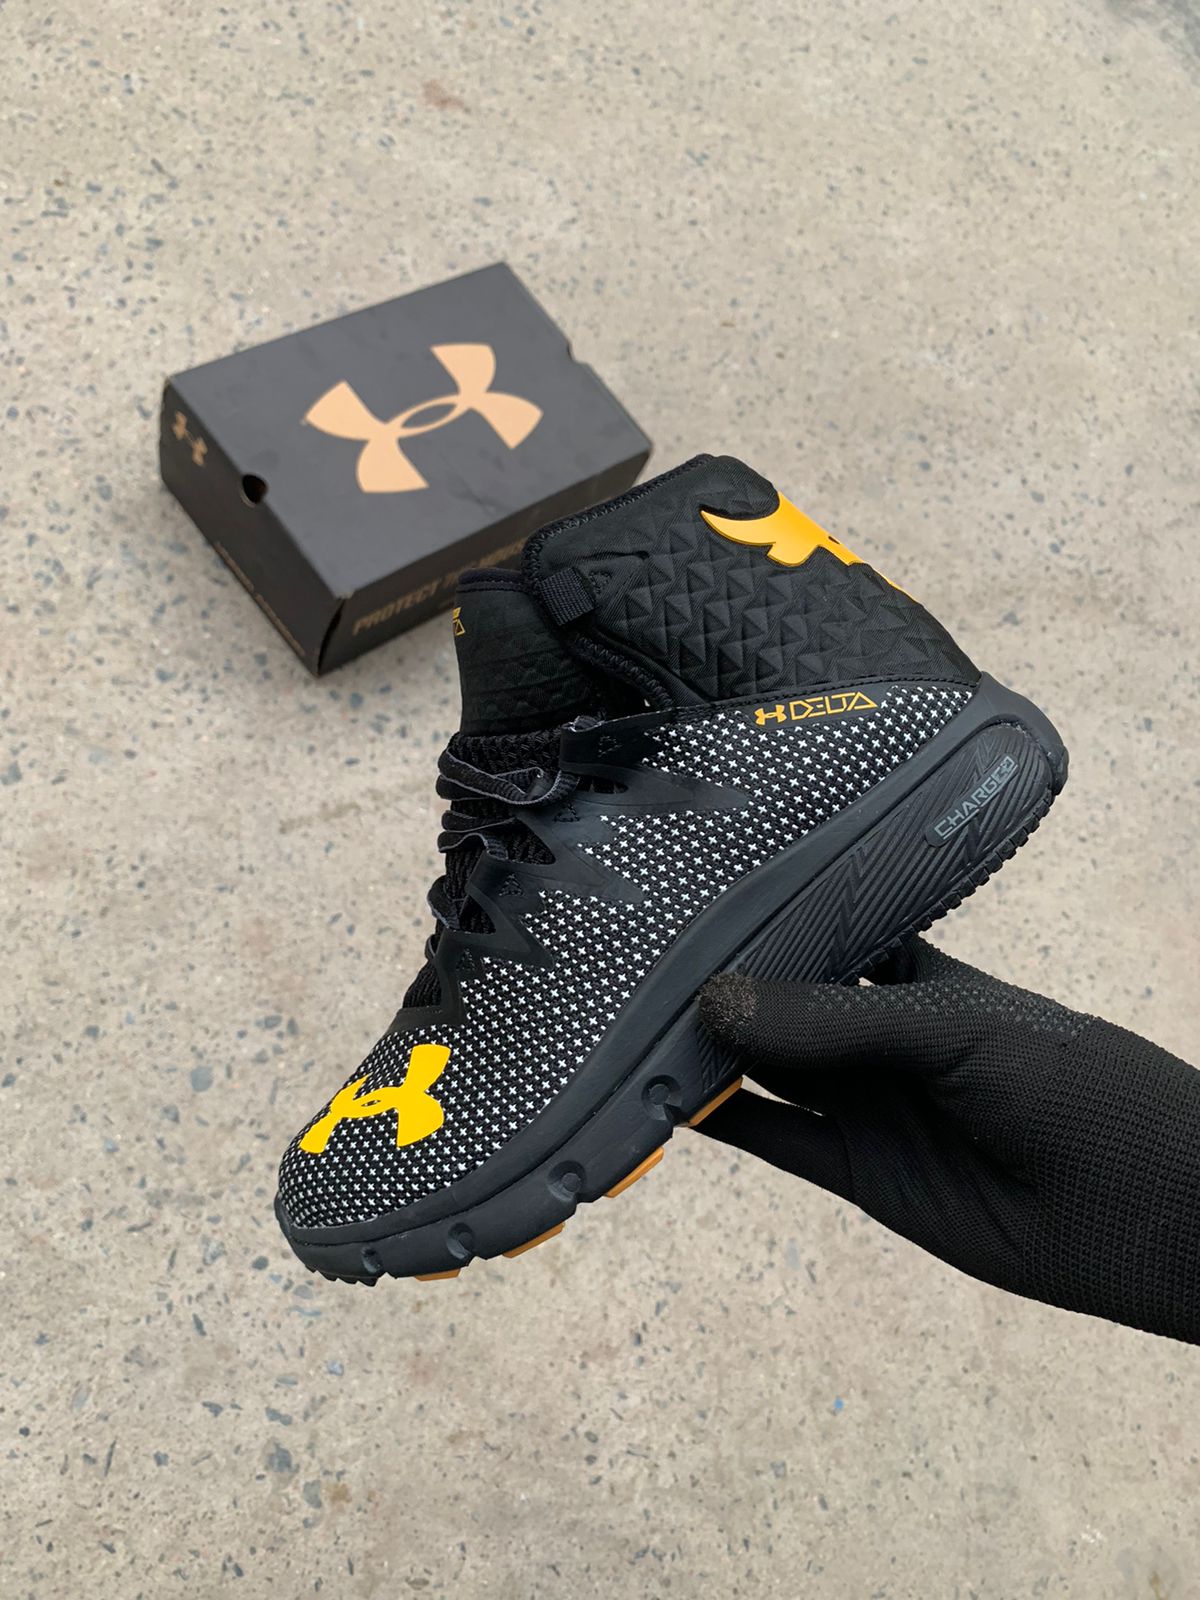 Unboxing The Rock / UA Signature Shoe, The Project Rock 1 - YouTube